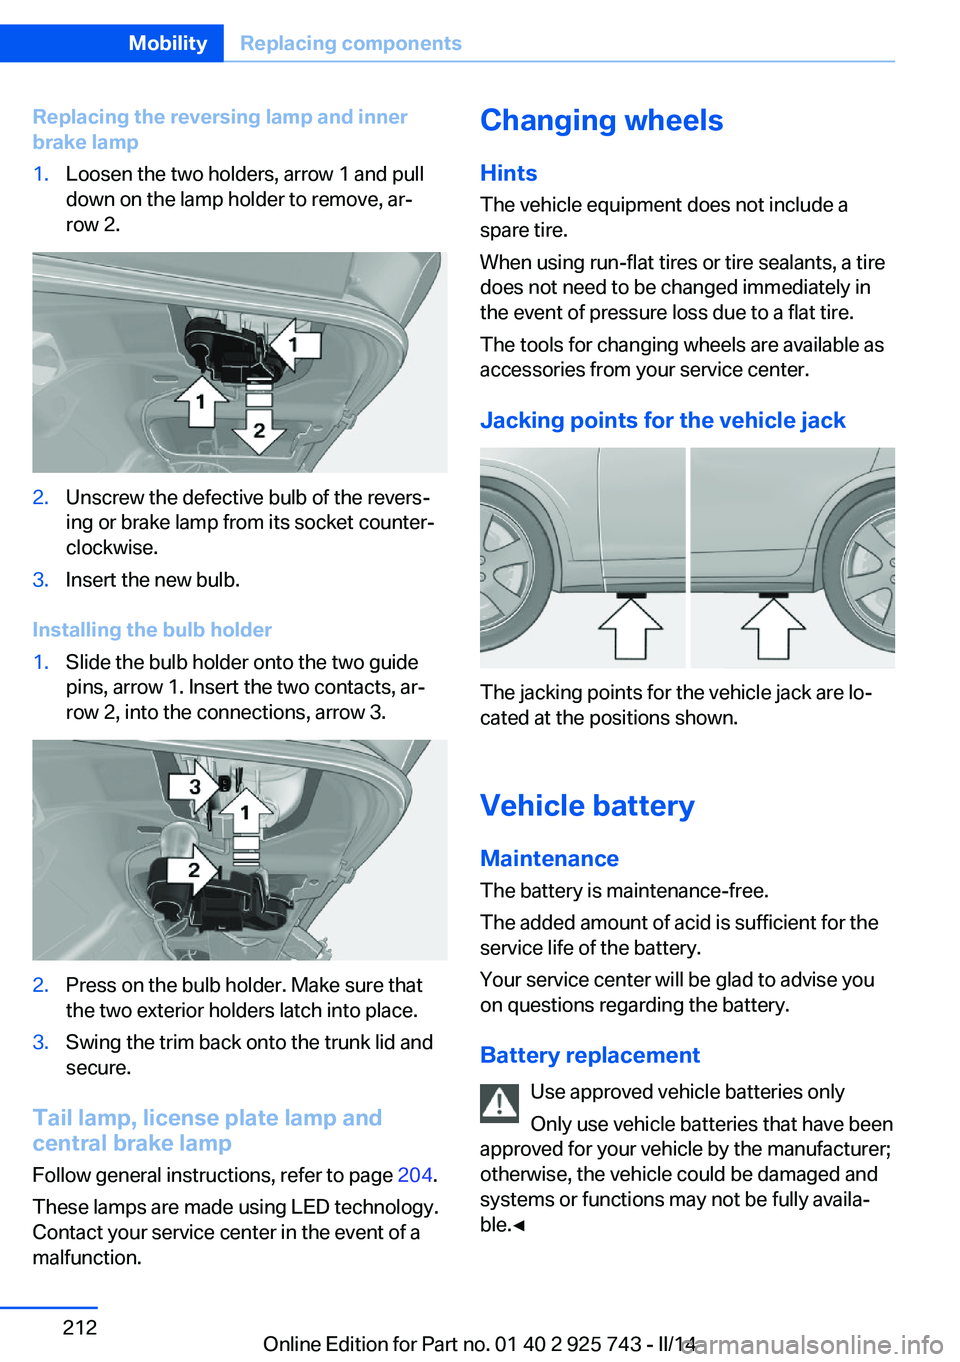 BMW 328I SEDAN 2014  Owners Manual Replacing the reversing lamp and inner
brake lamp1.Loosen the two holders, arrow 1 and pull
down on the lamp holder to remove, ar‐
row 2.2.Unscrew the defective bulb of the revers‐
ing or brake la